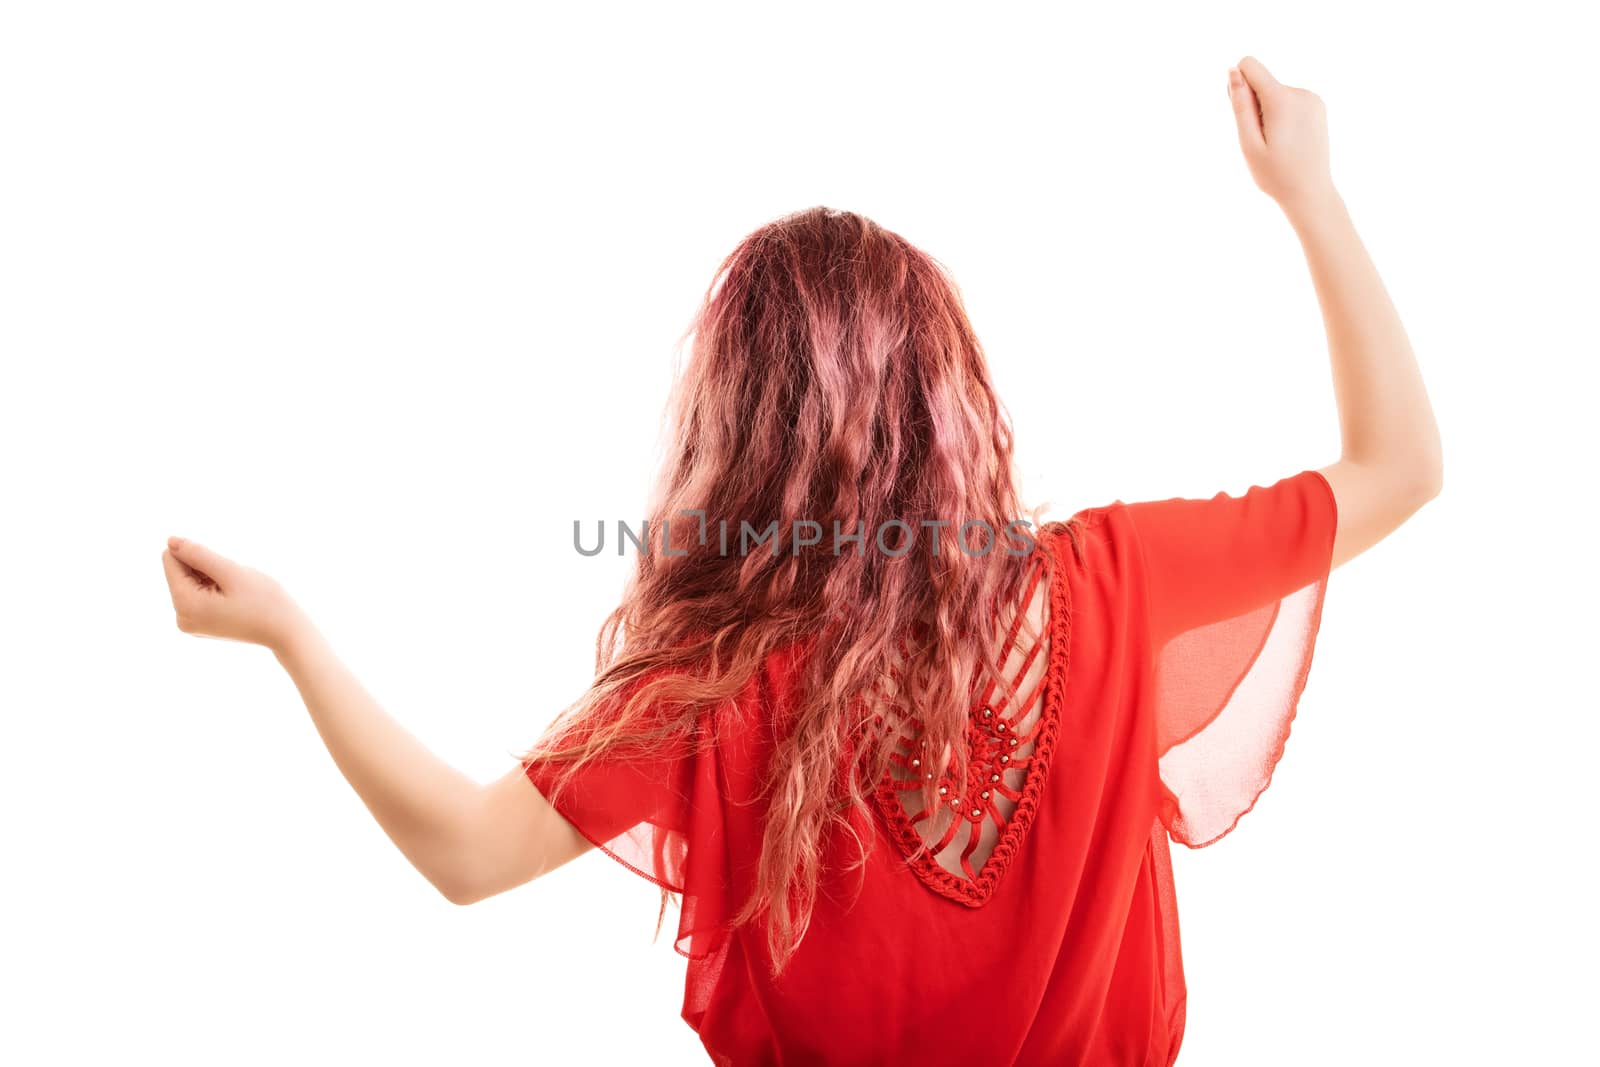 Redheaded girl turned with her back, dancing, gesturing with arms up, isolated on a white background